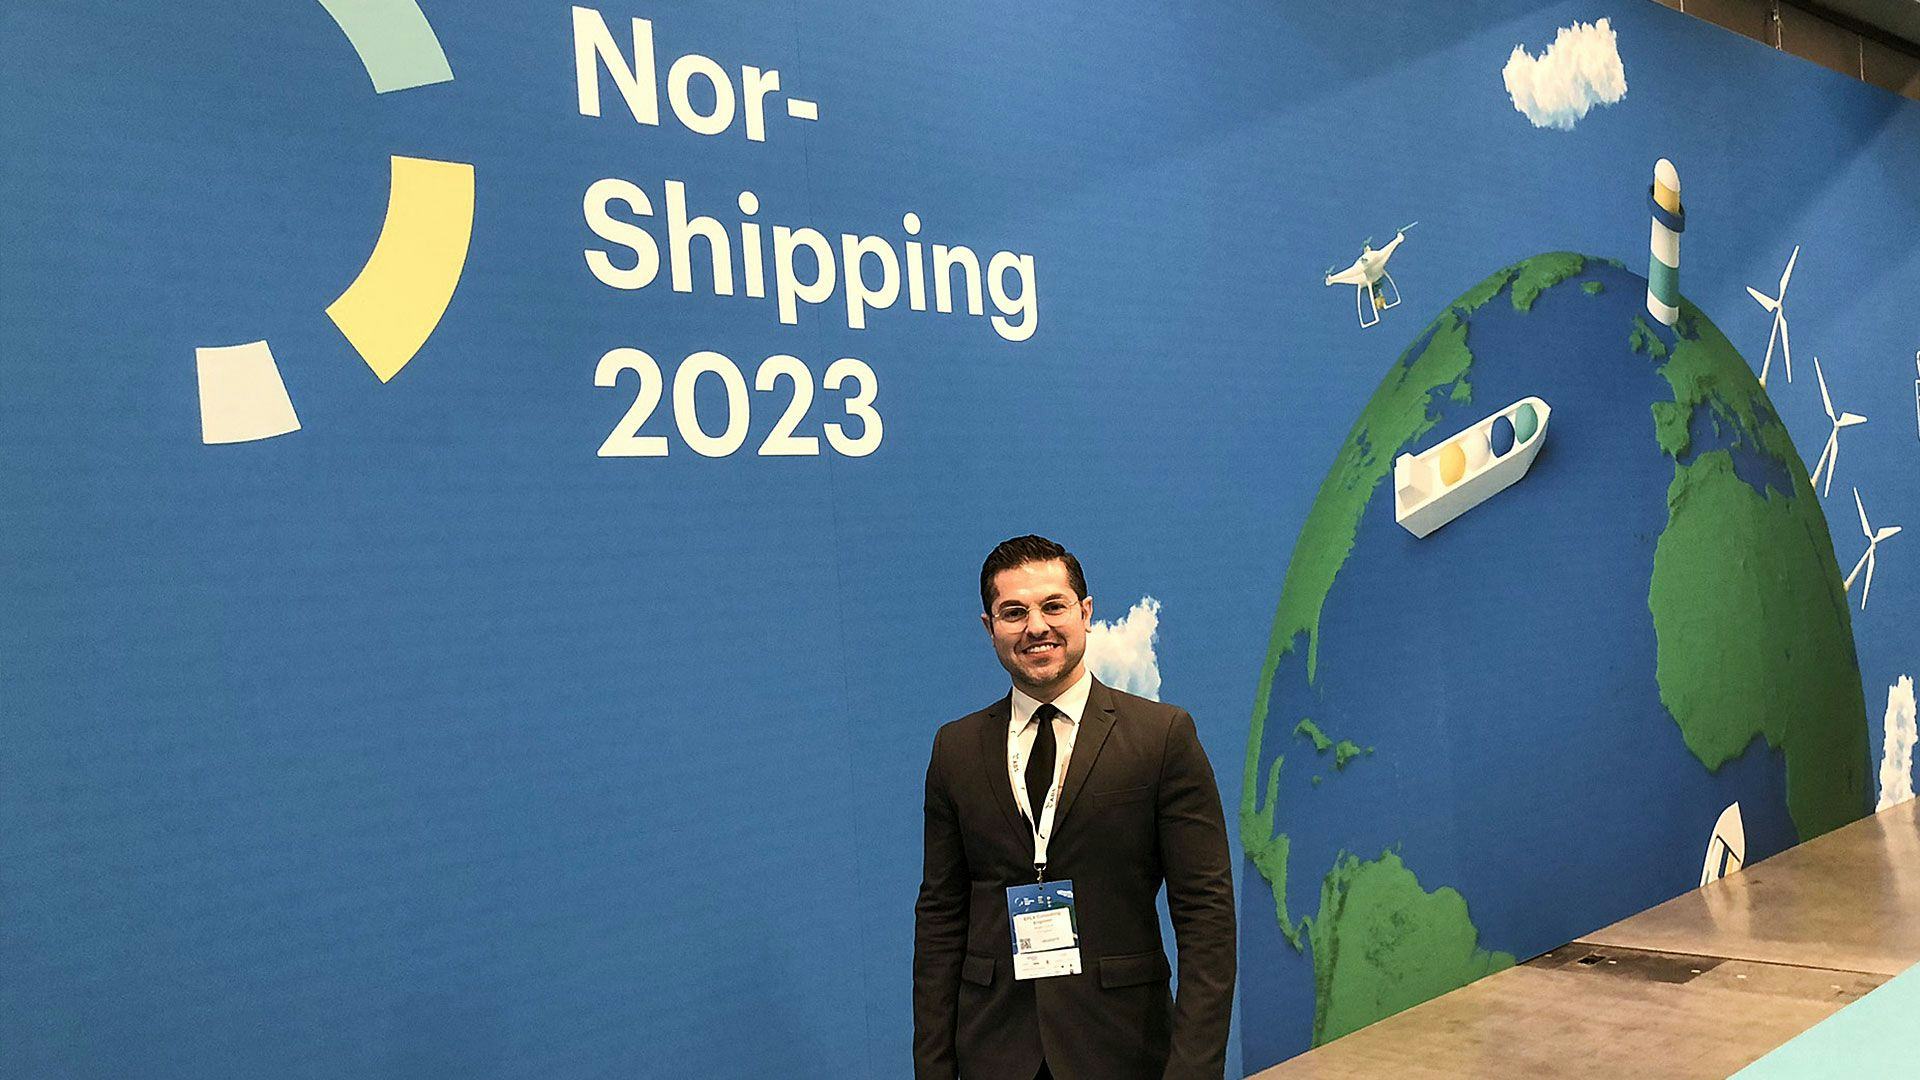 A man standing in front of a backdrop featuring graphics of globe, a drone and a ship